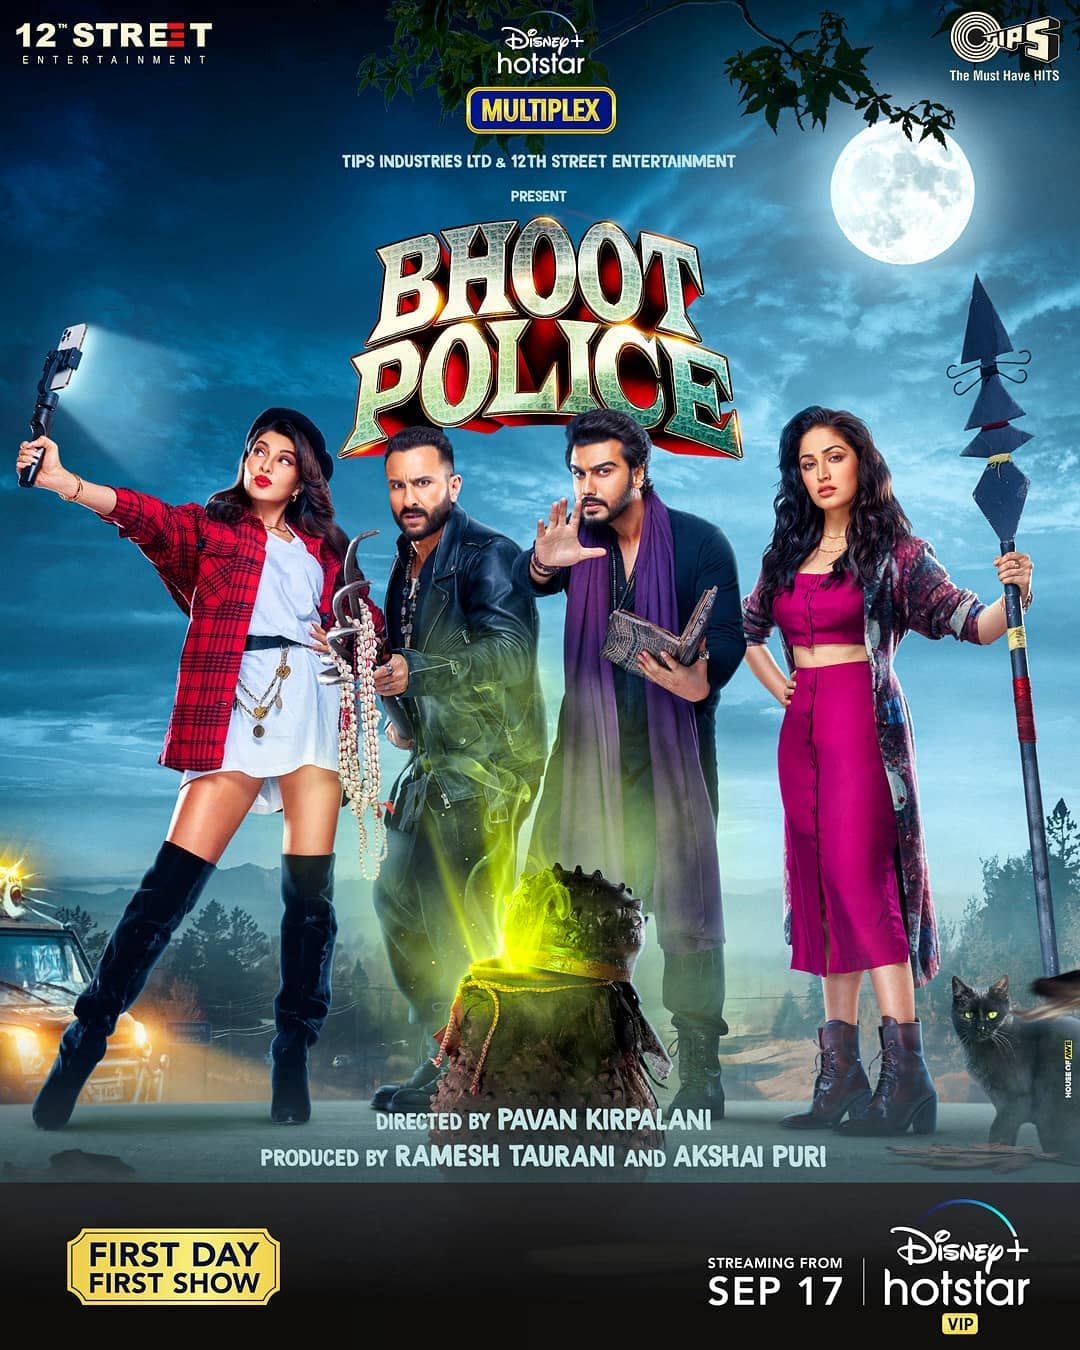 Saif Ali Khan, Arjun kapoor starrer Bhoot Police all set to arrive in September, makers announce new release date